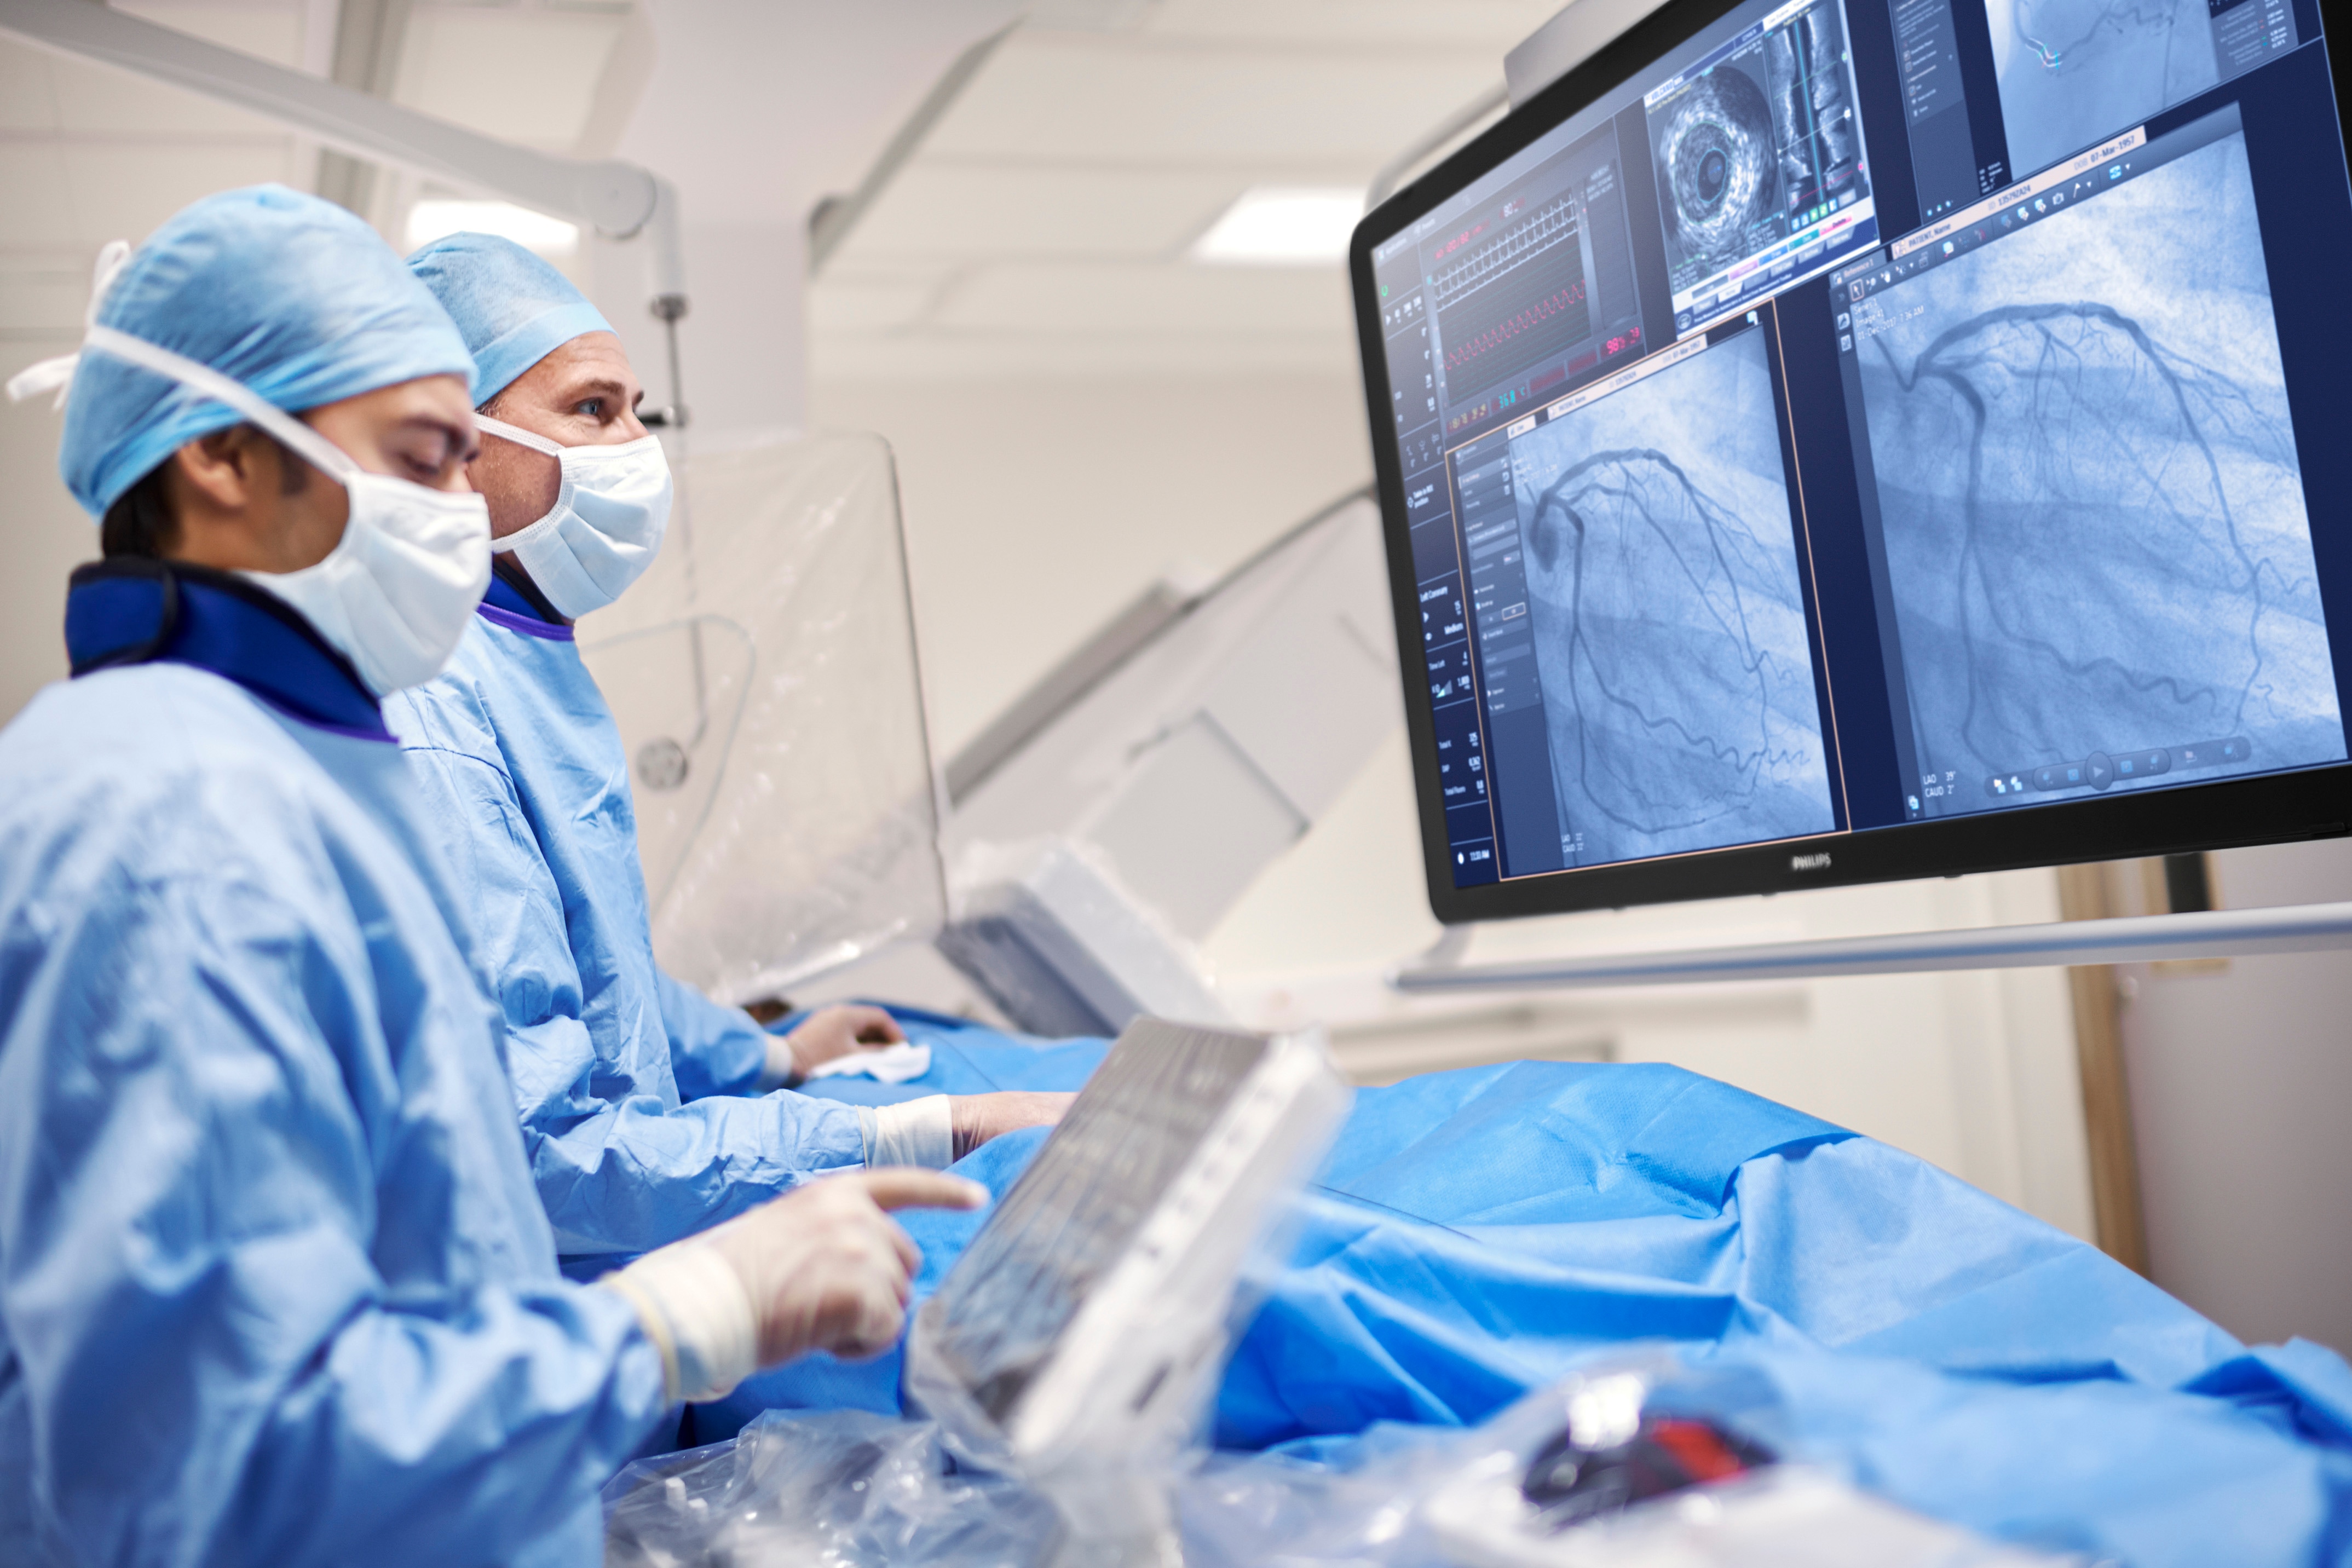 2017 – Philips Azurion offers a unique operating system that optimizes integration and an intuitive user interface that puts controls at the clinician’s fingertips